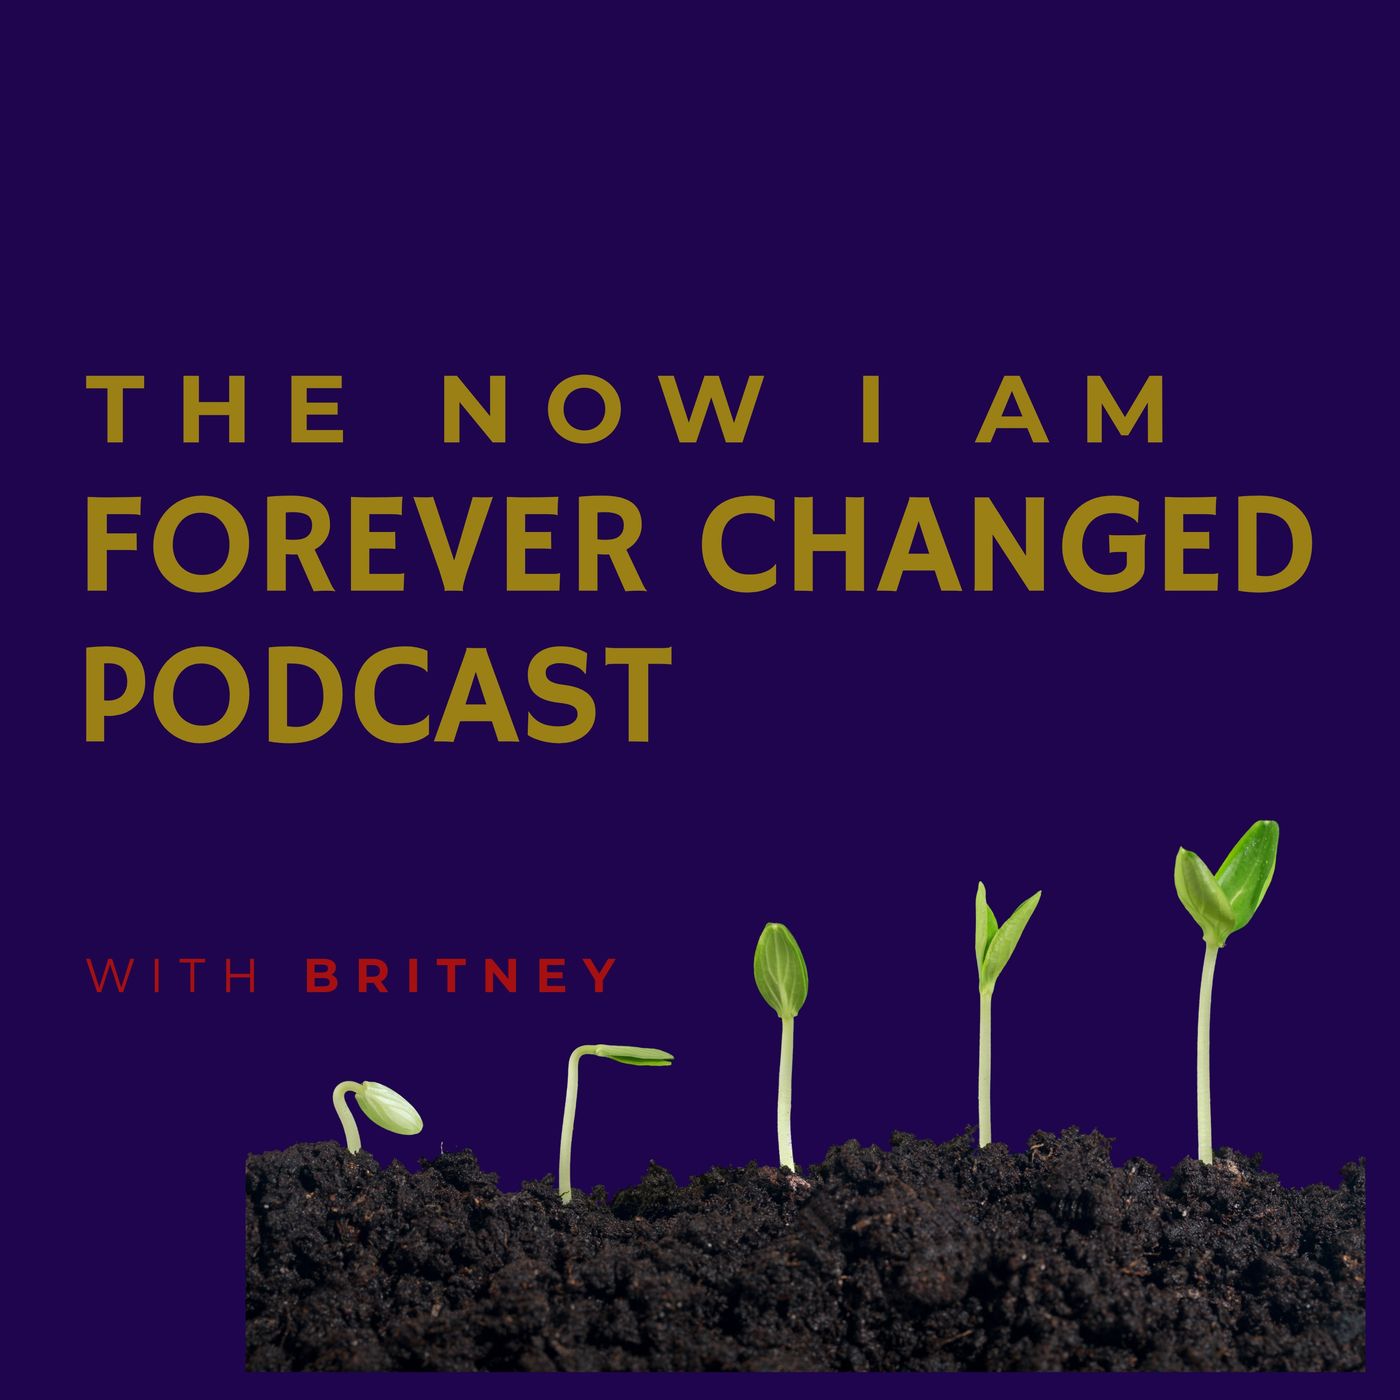 The Now I Am Forever Changed Podcast